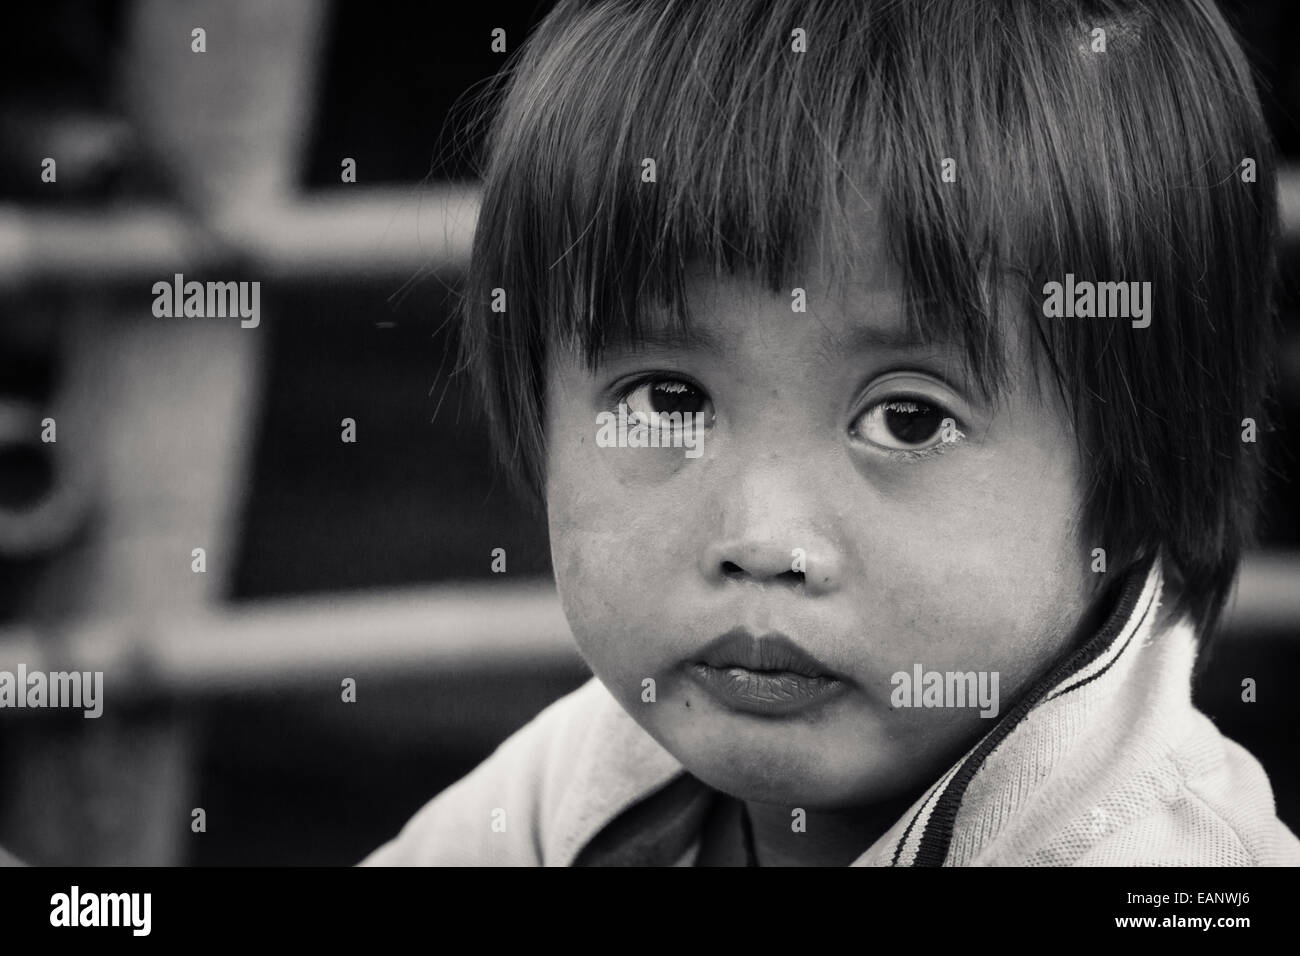 Young Lao child with a serious face Stock Photo